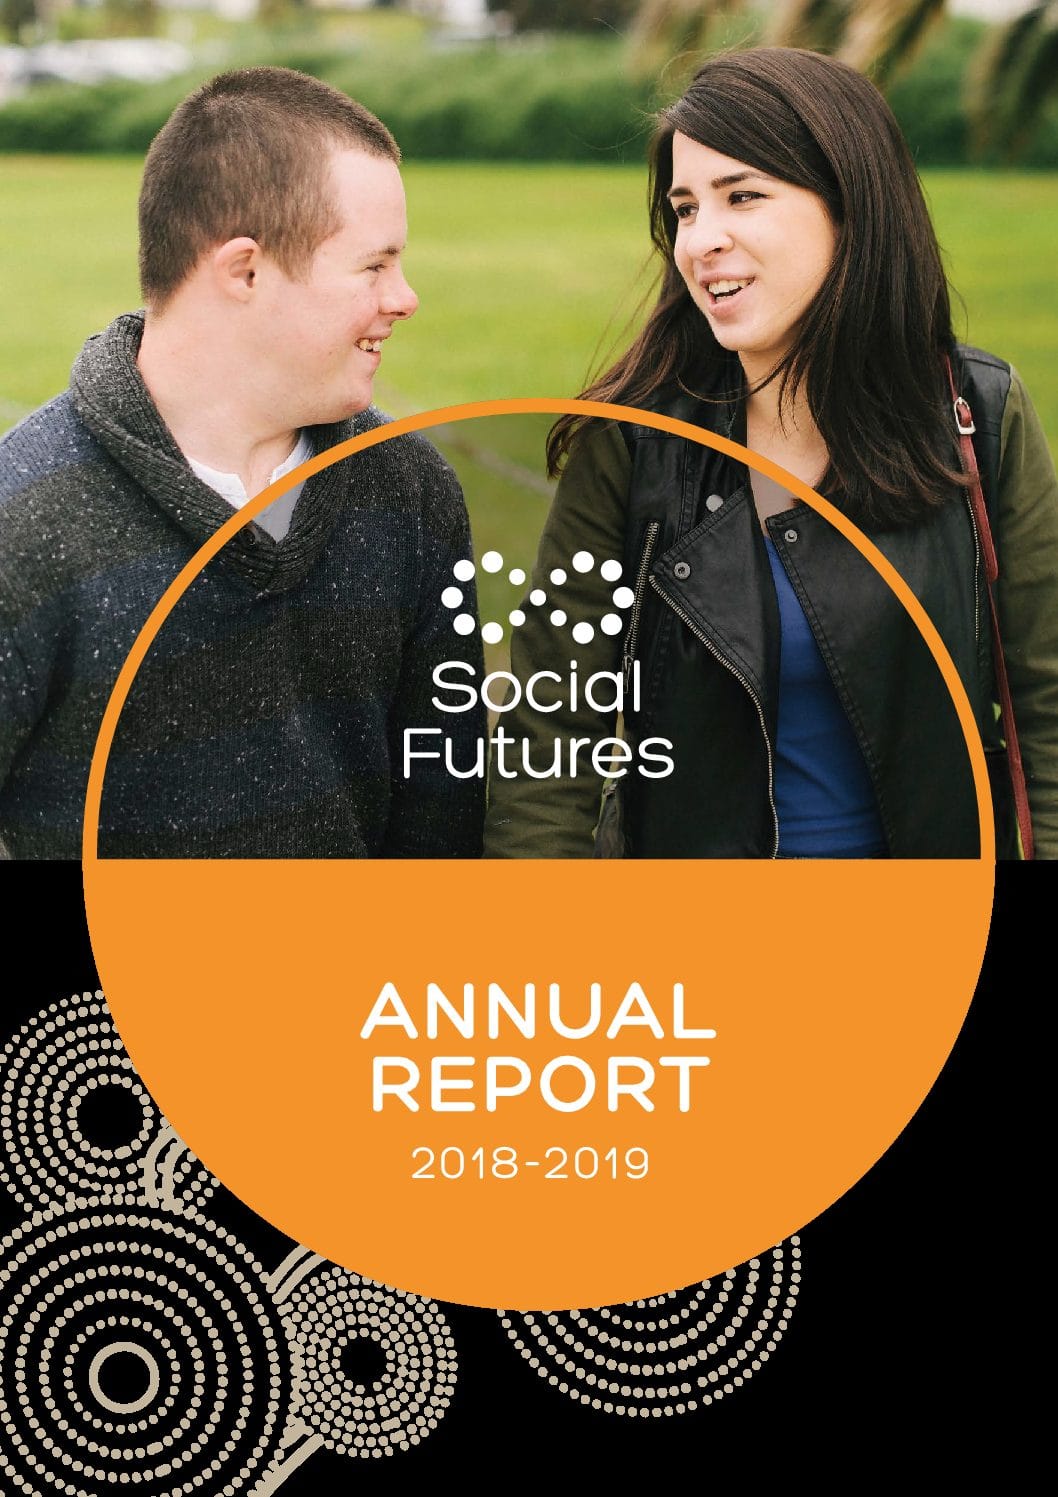 2018-19 Annual Report front cover, featuring a man and woman walking and smiling together on green grass.